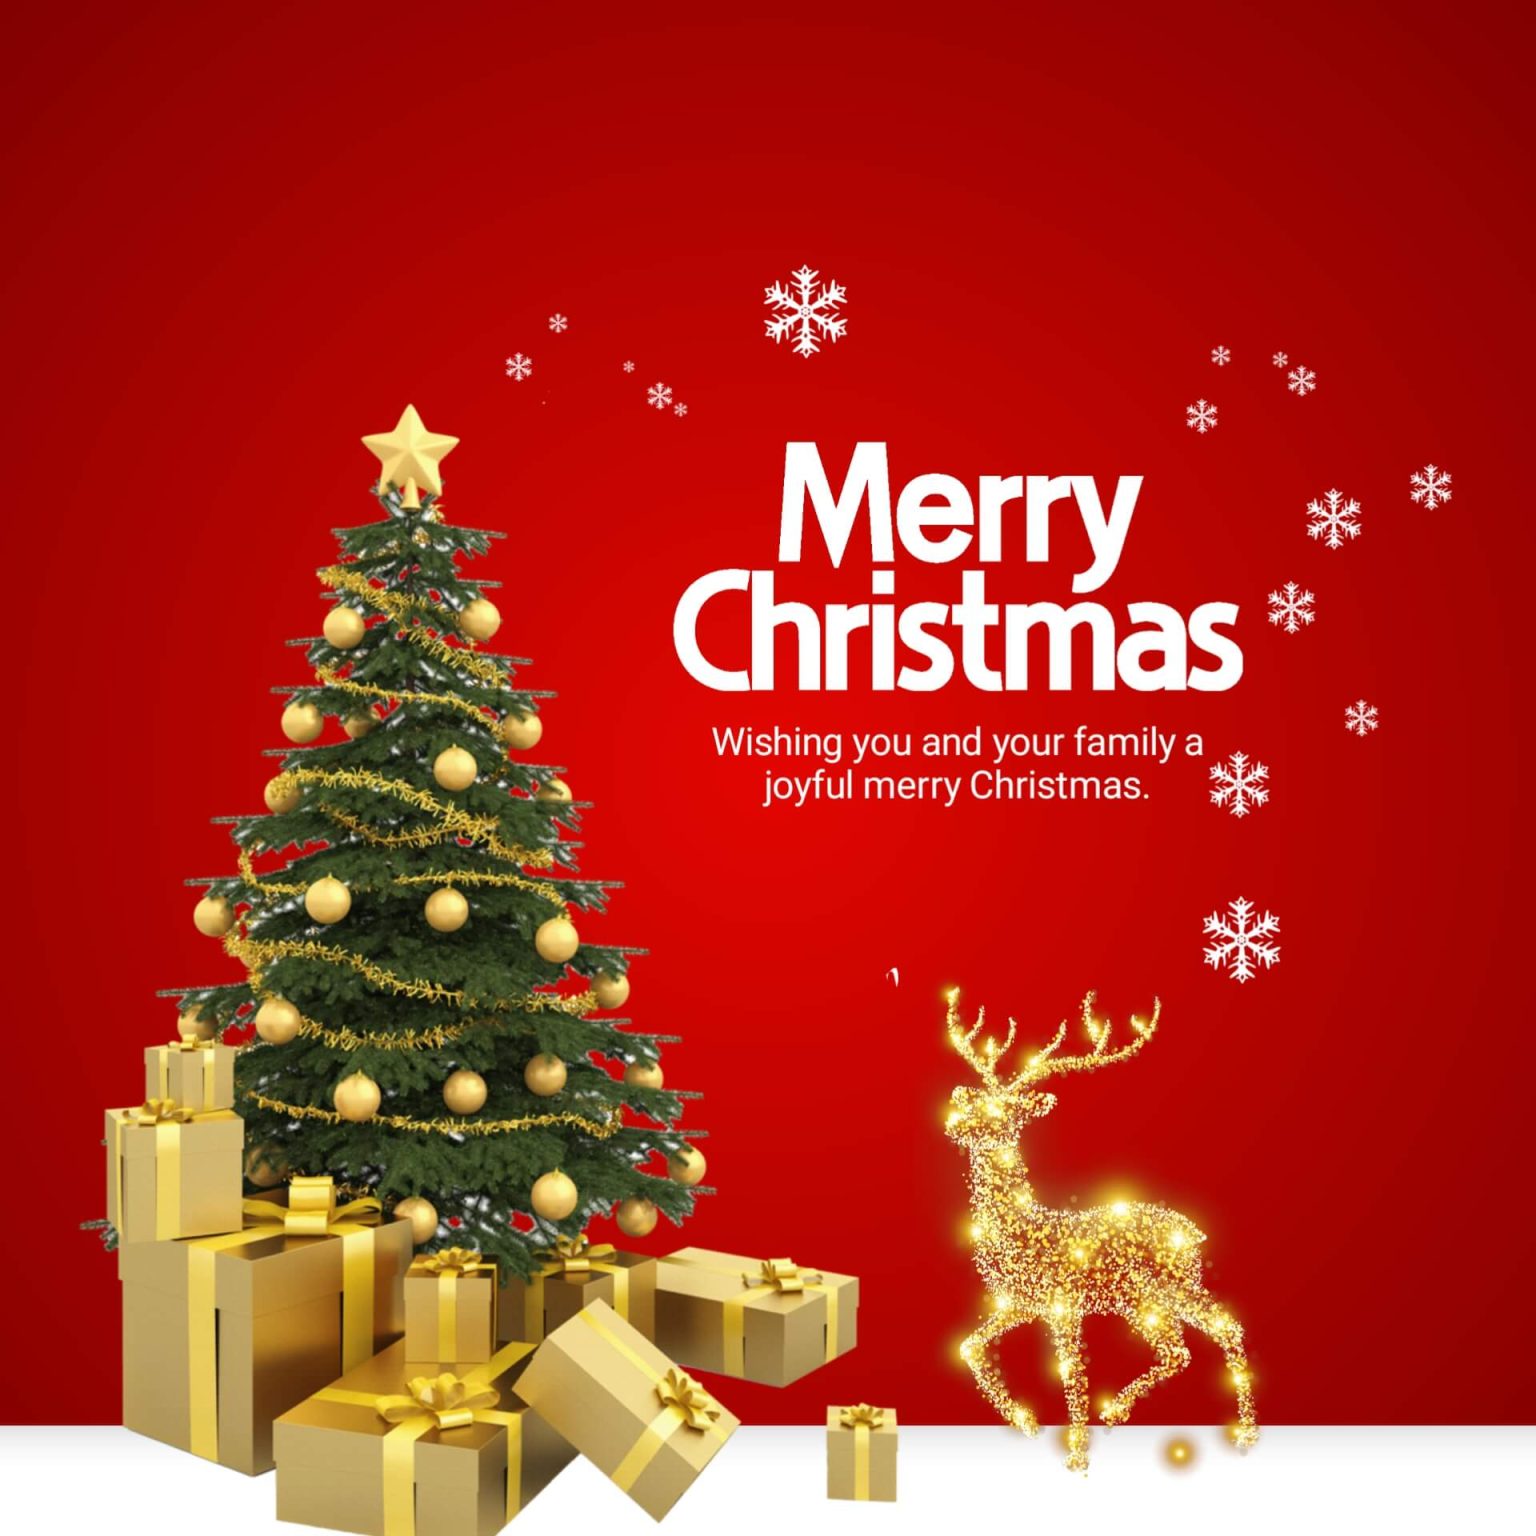 merry christmas images HD